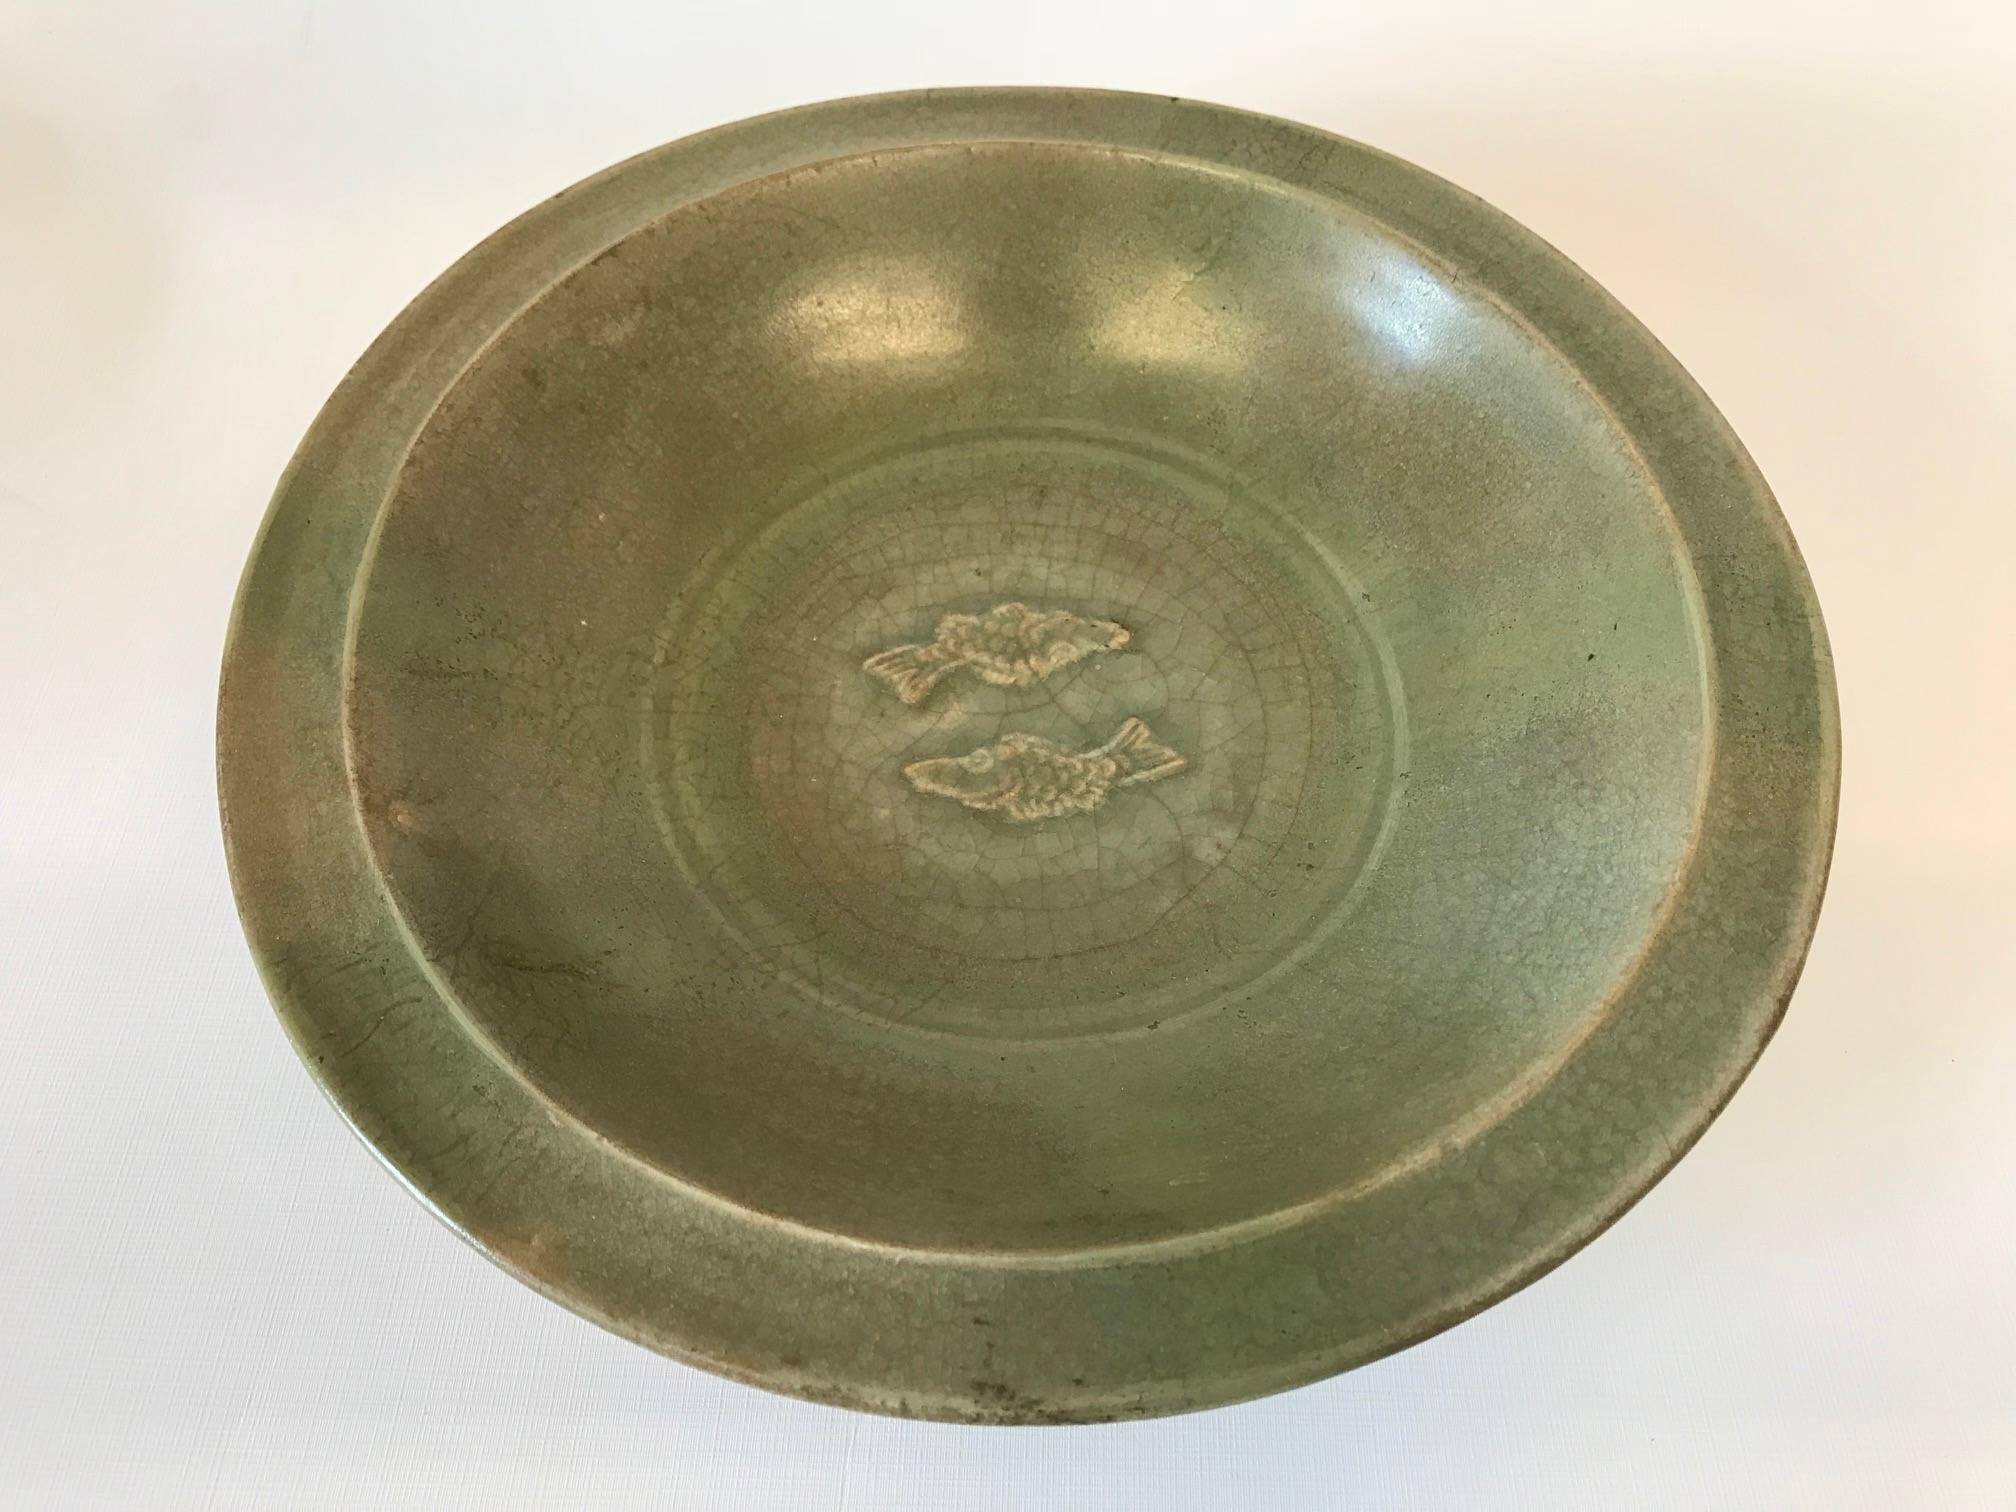 Rare southern song dynasty Longquan celadon bowl with twin fish
Authenticated and stamped by the National museum of the Philippines.

 